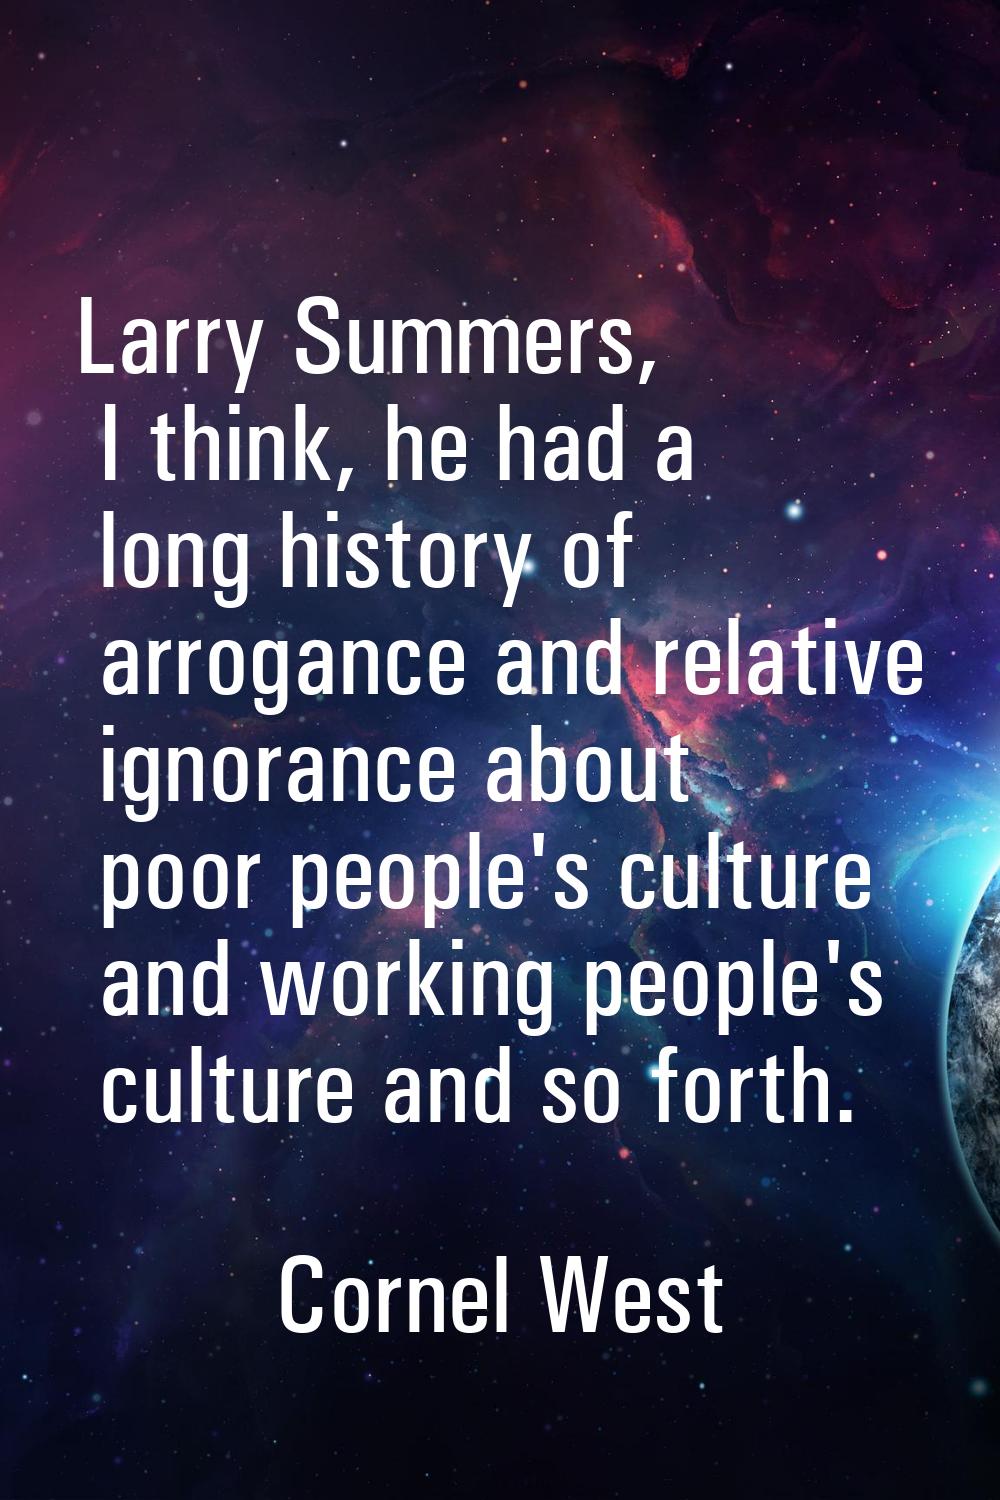 Larry Summers, I think, he had a long history of arrogance and relative ignorance about poor people